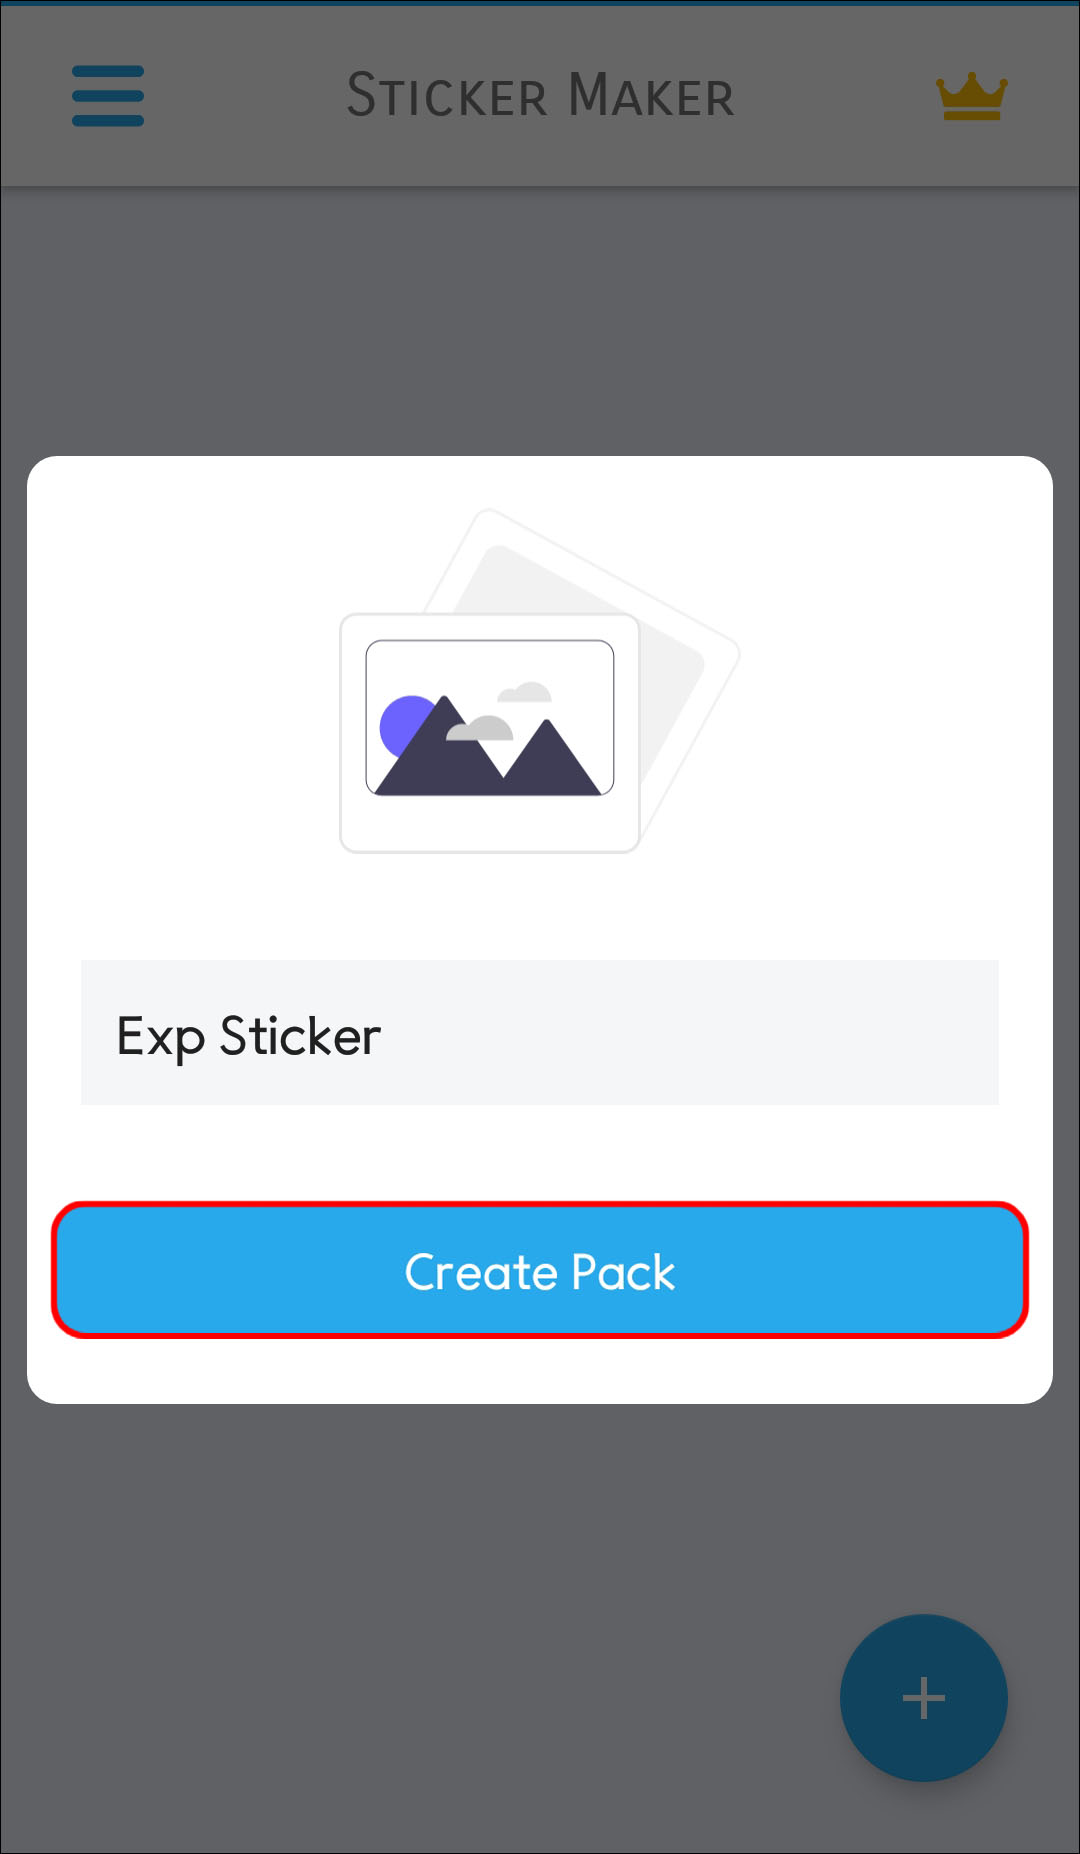 How to Make Animated Stickers for Telegram